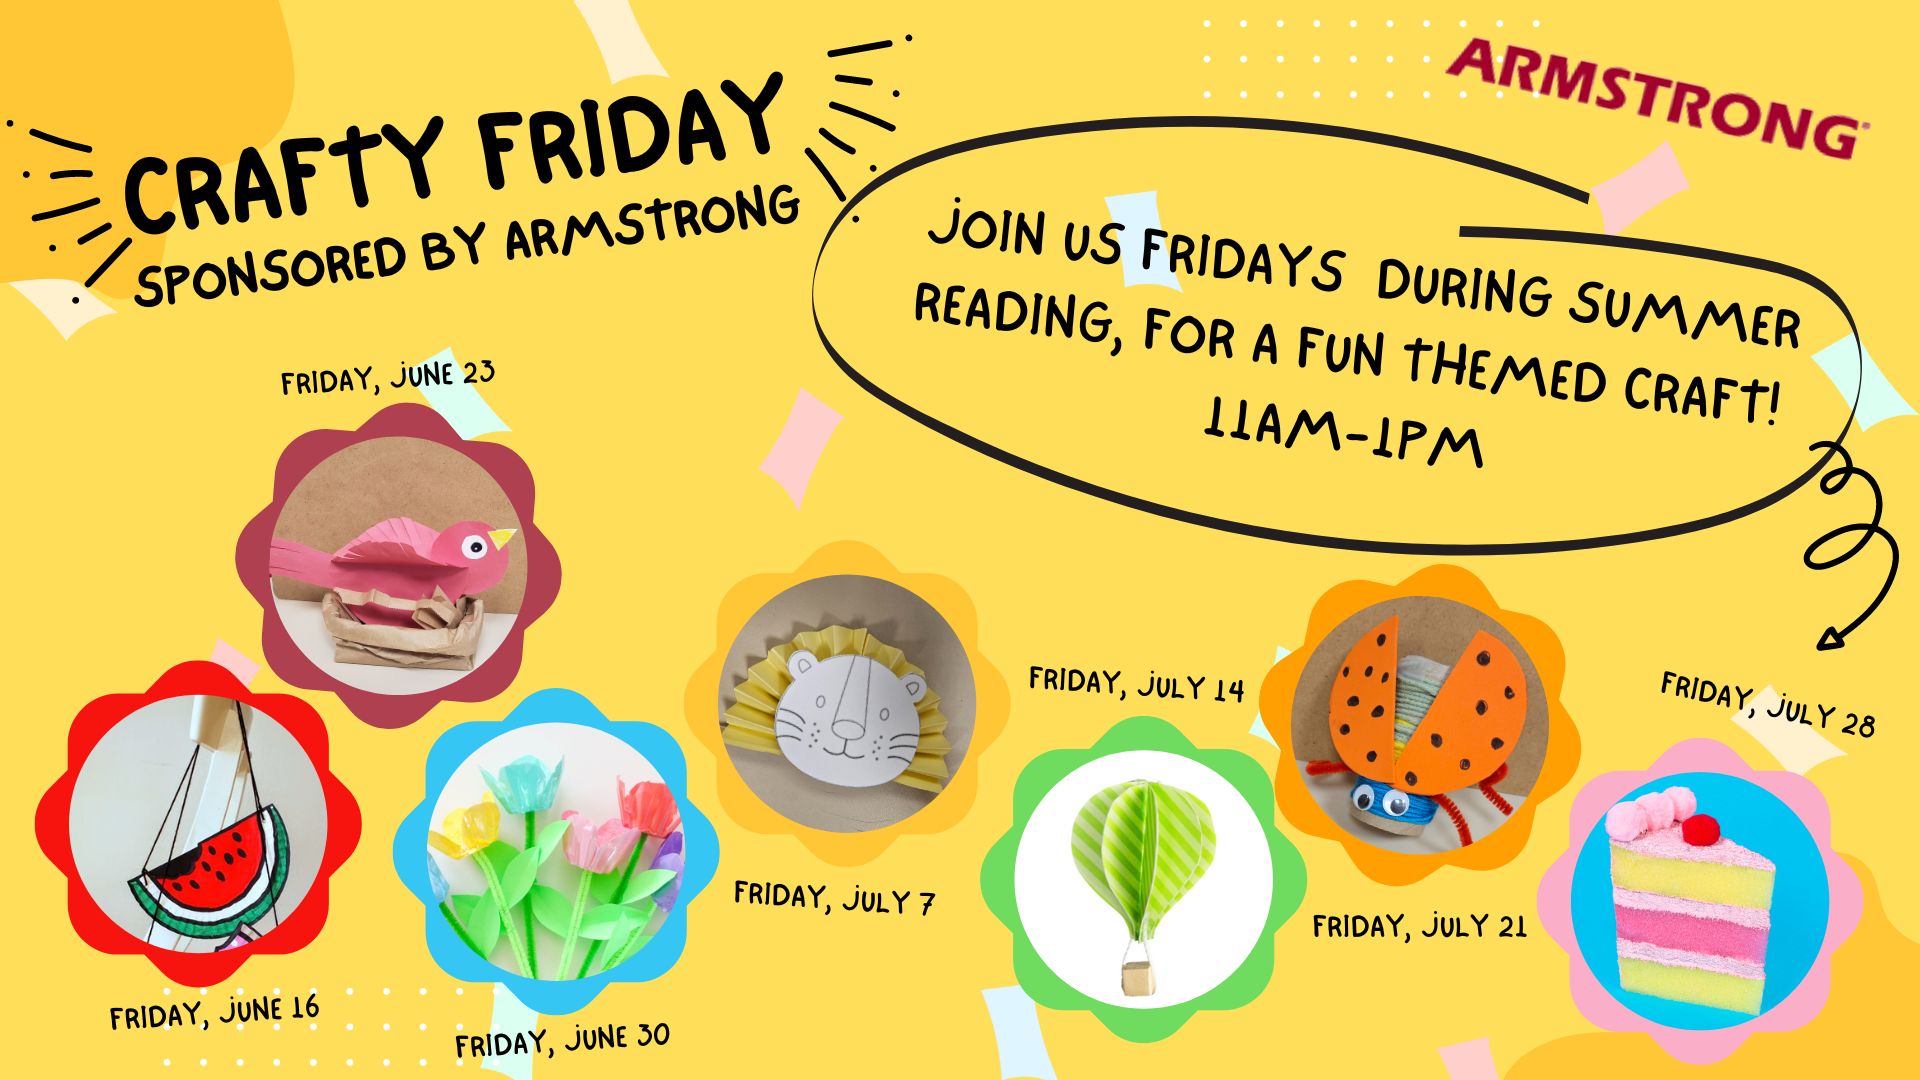 Flyer for Crafty Fridays sponsored by Armstrong